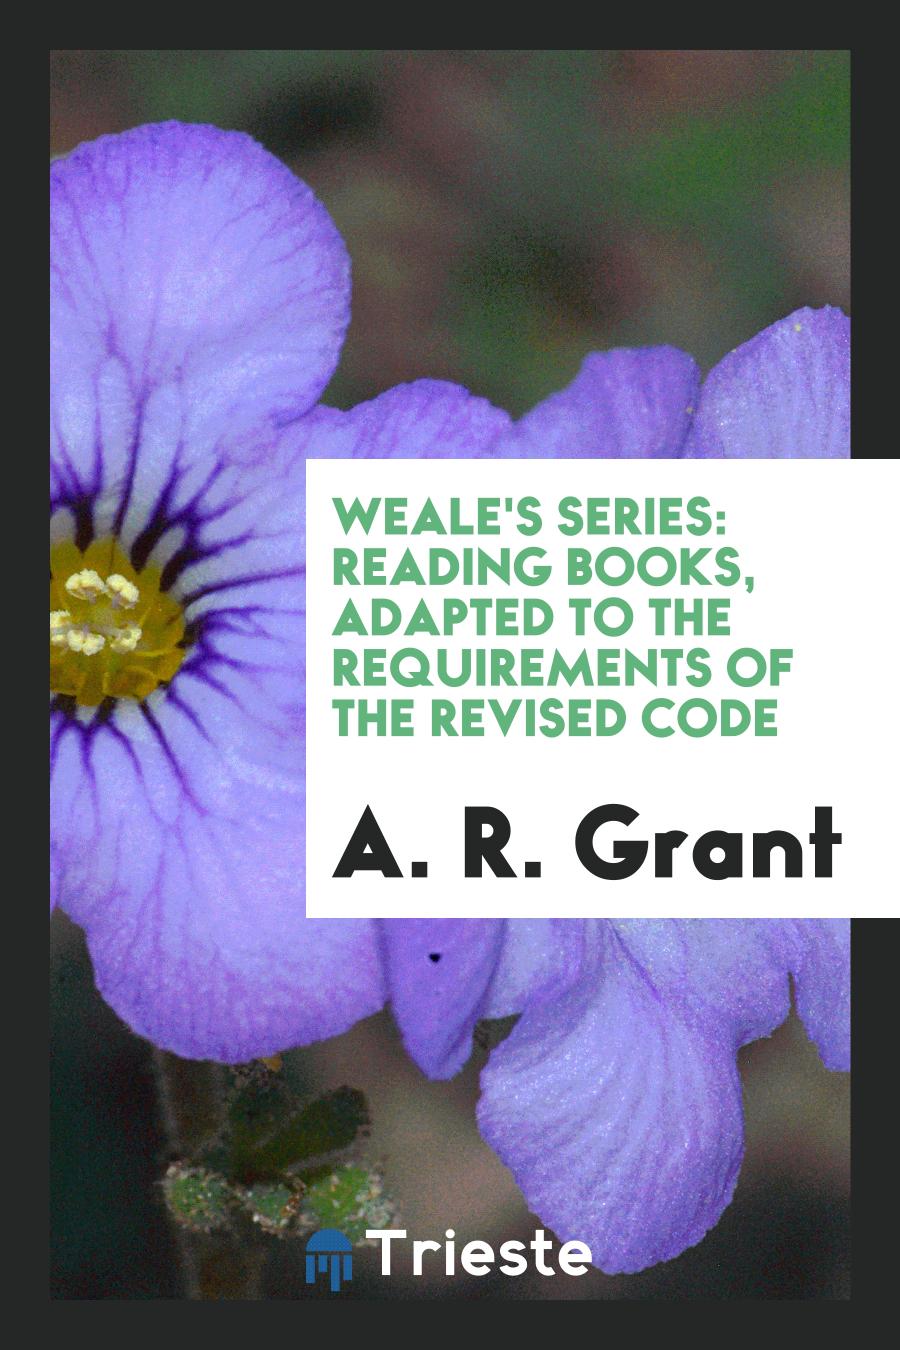 Weale's Series: Reading Books, Adapted to the Requirements of the Revised Code